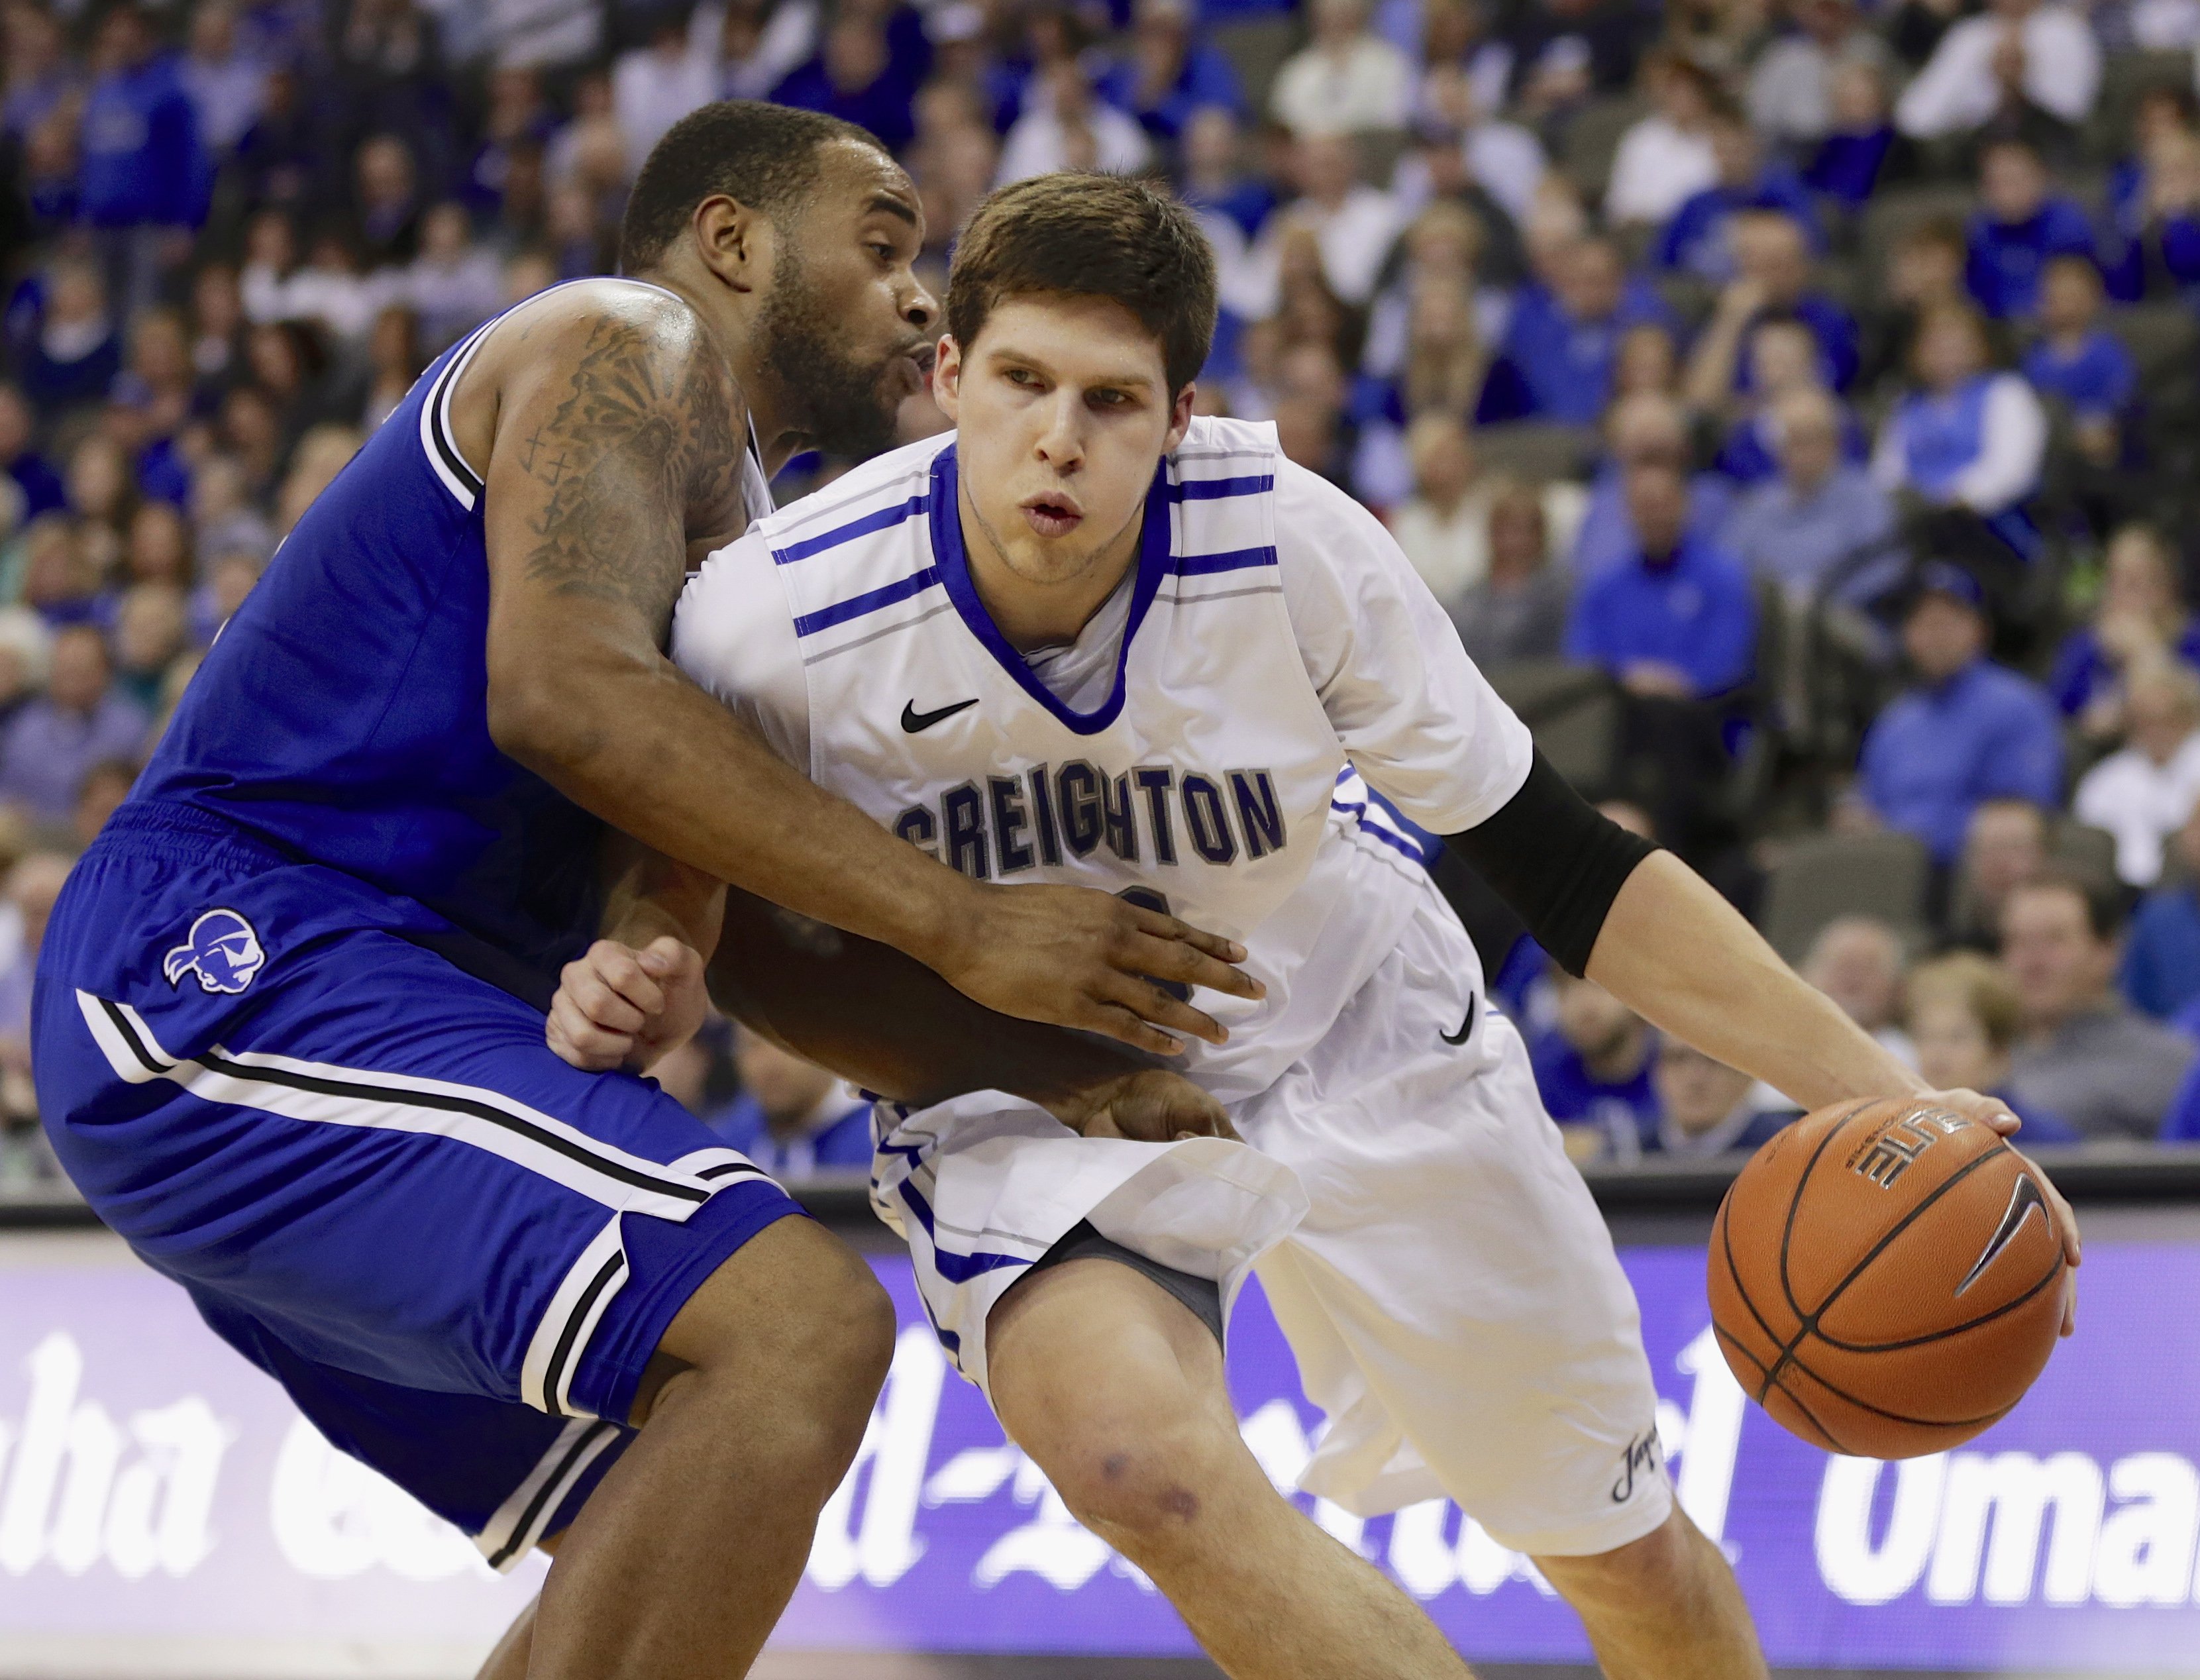 Doug McDermott The 2014 Big East Player of the Year, McDermott has been largely responsible for Creighton's rise to prominence over the last three seasons. The Bluejays have made the Round of 32 in consecutive years for the first time since the  tournament expanded  in 1975 and they have designs on a deeper run this year as a No. 3 seed in the West. That will only happen if McDermott can keep up his stellar play.